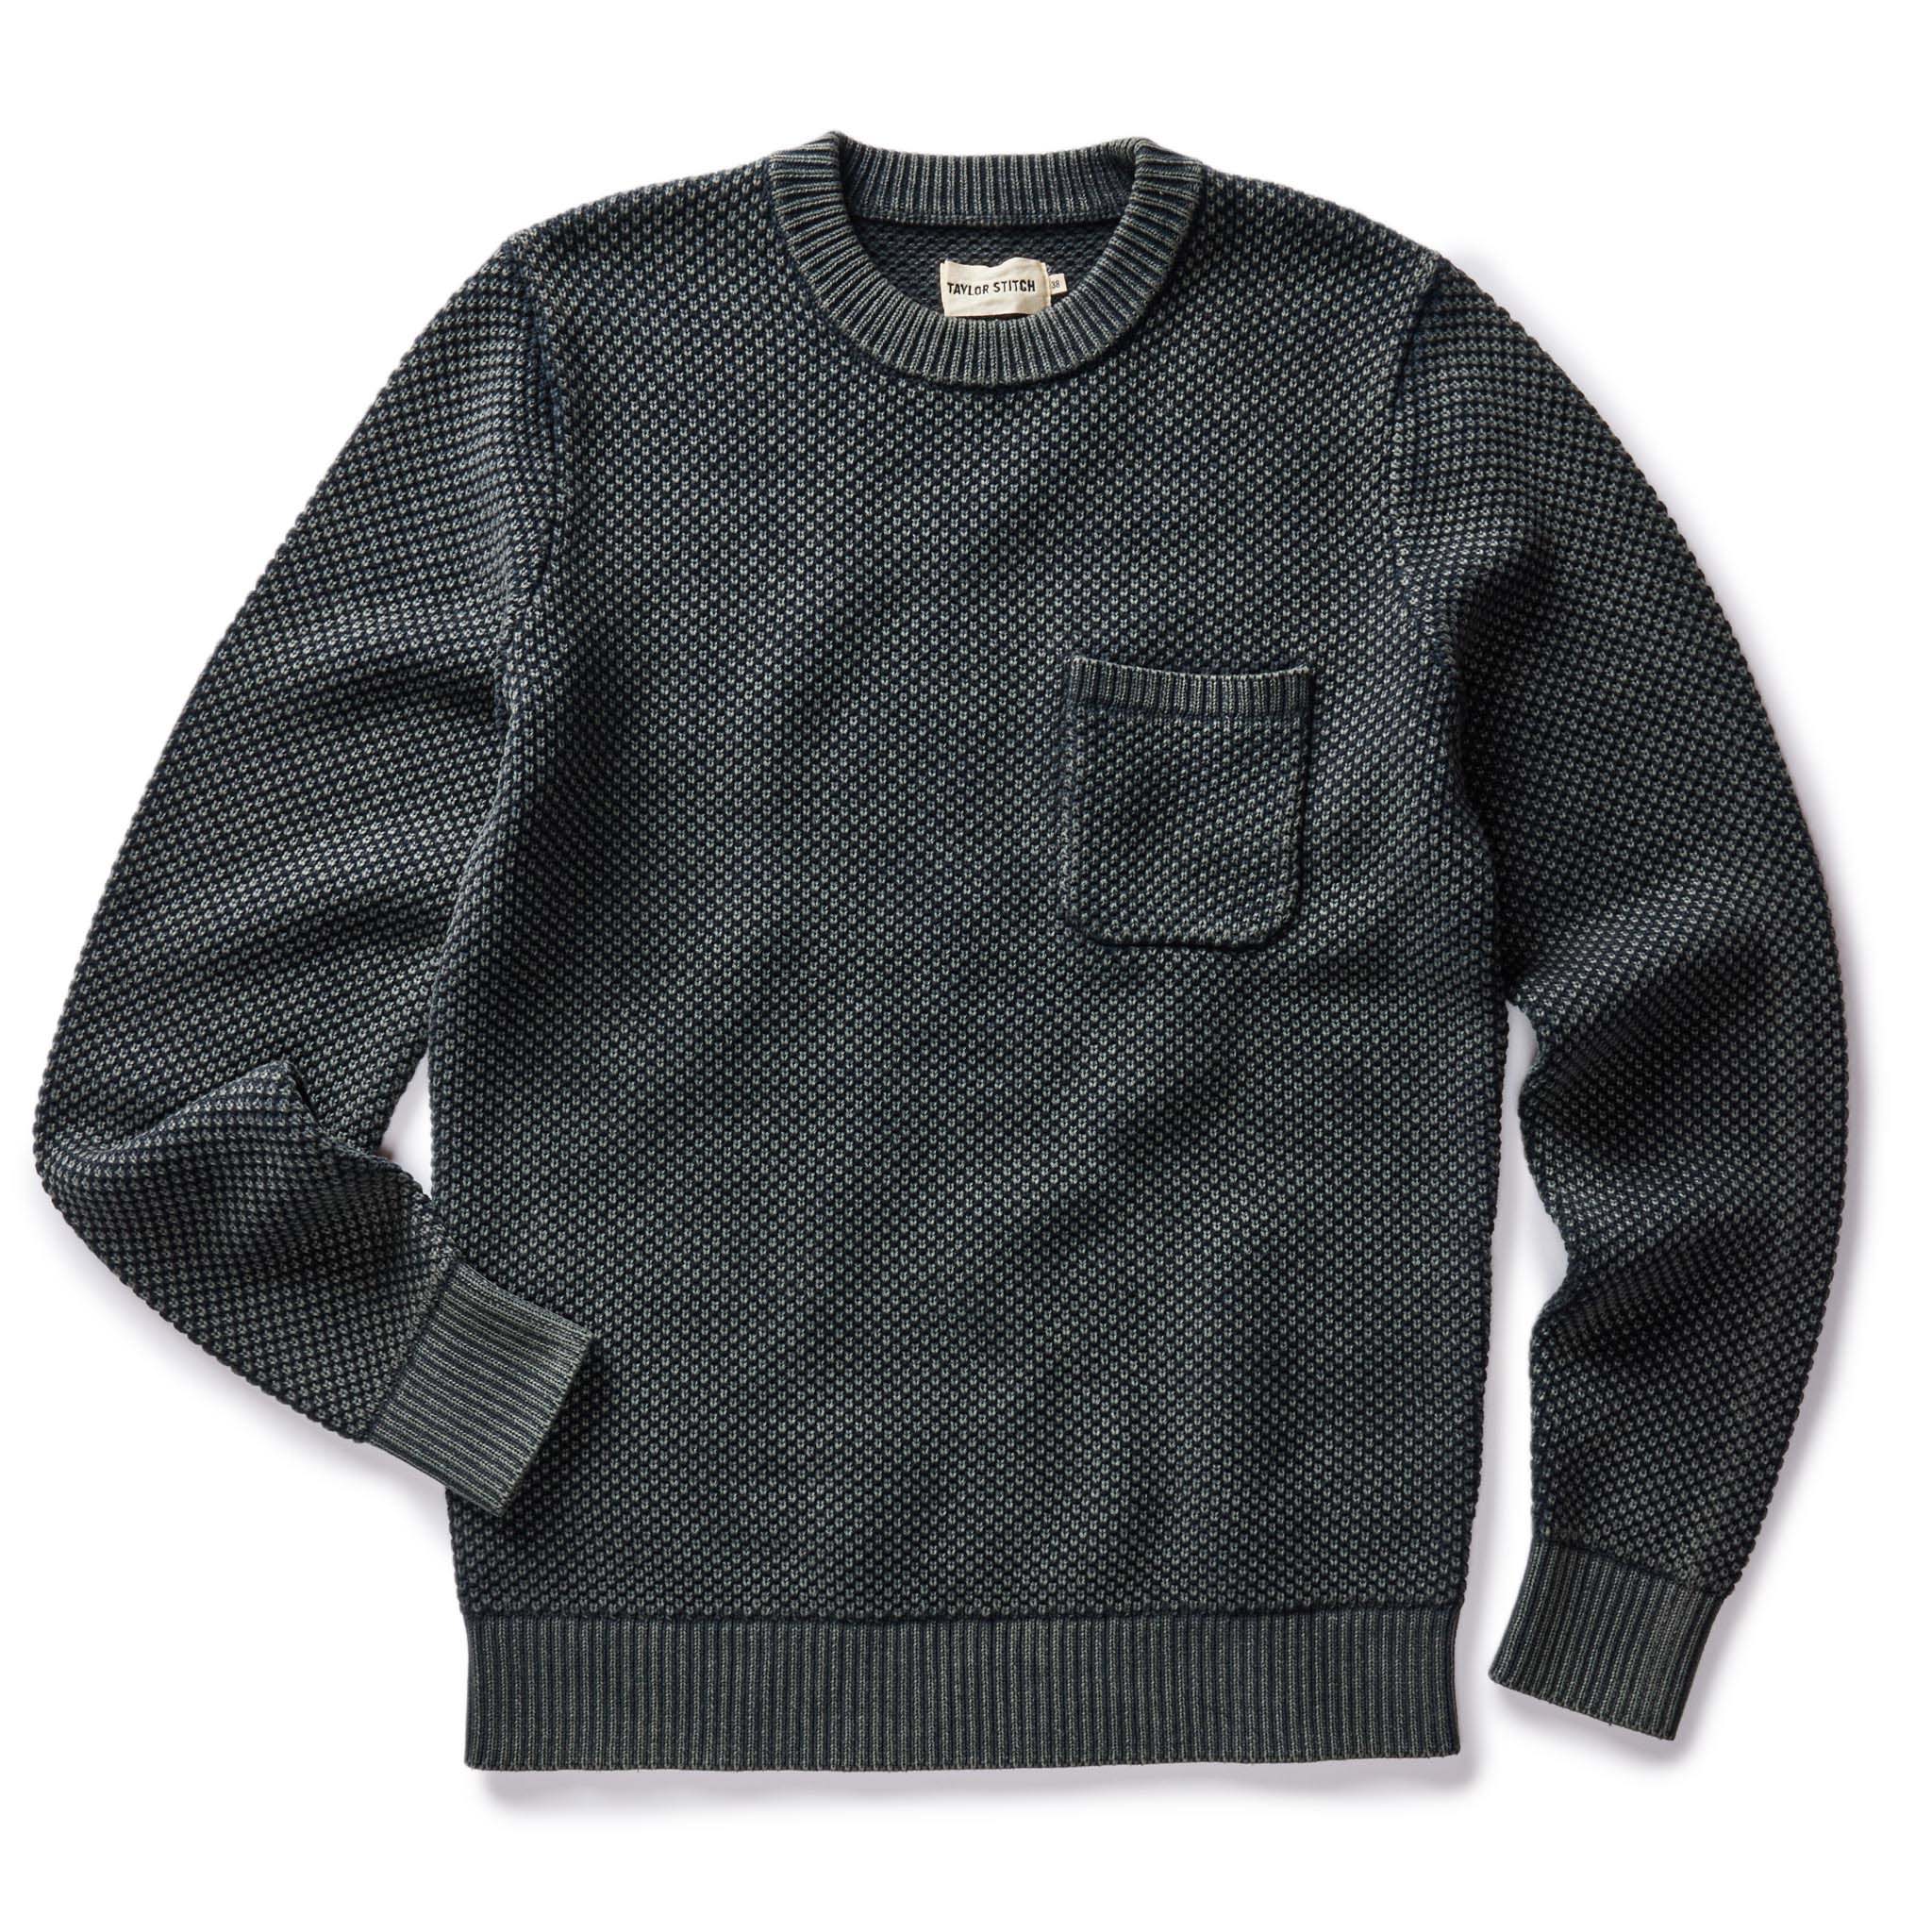 The Crawford Crew Sweater in Washed Asphalt